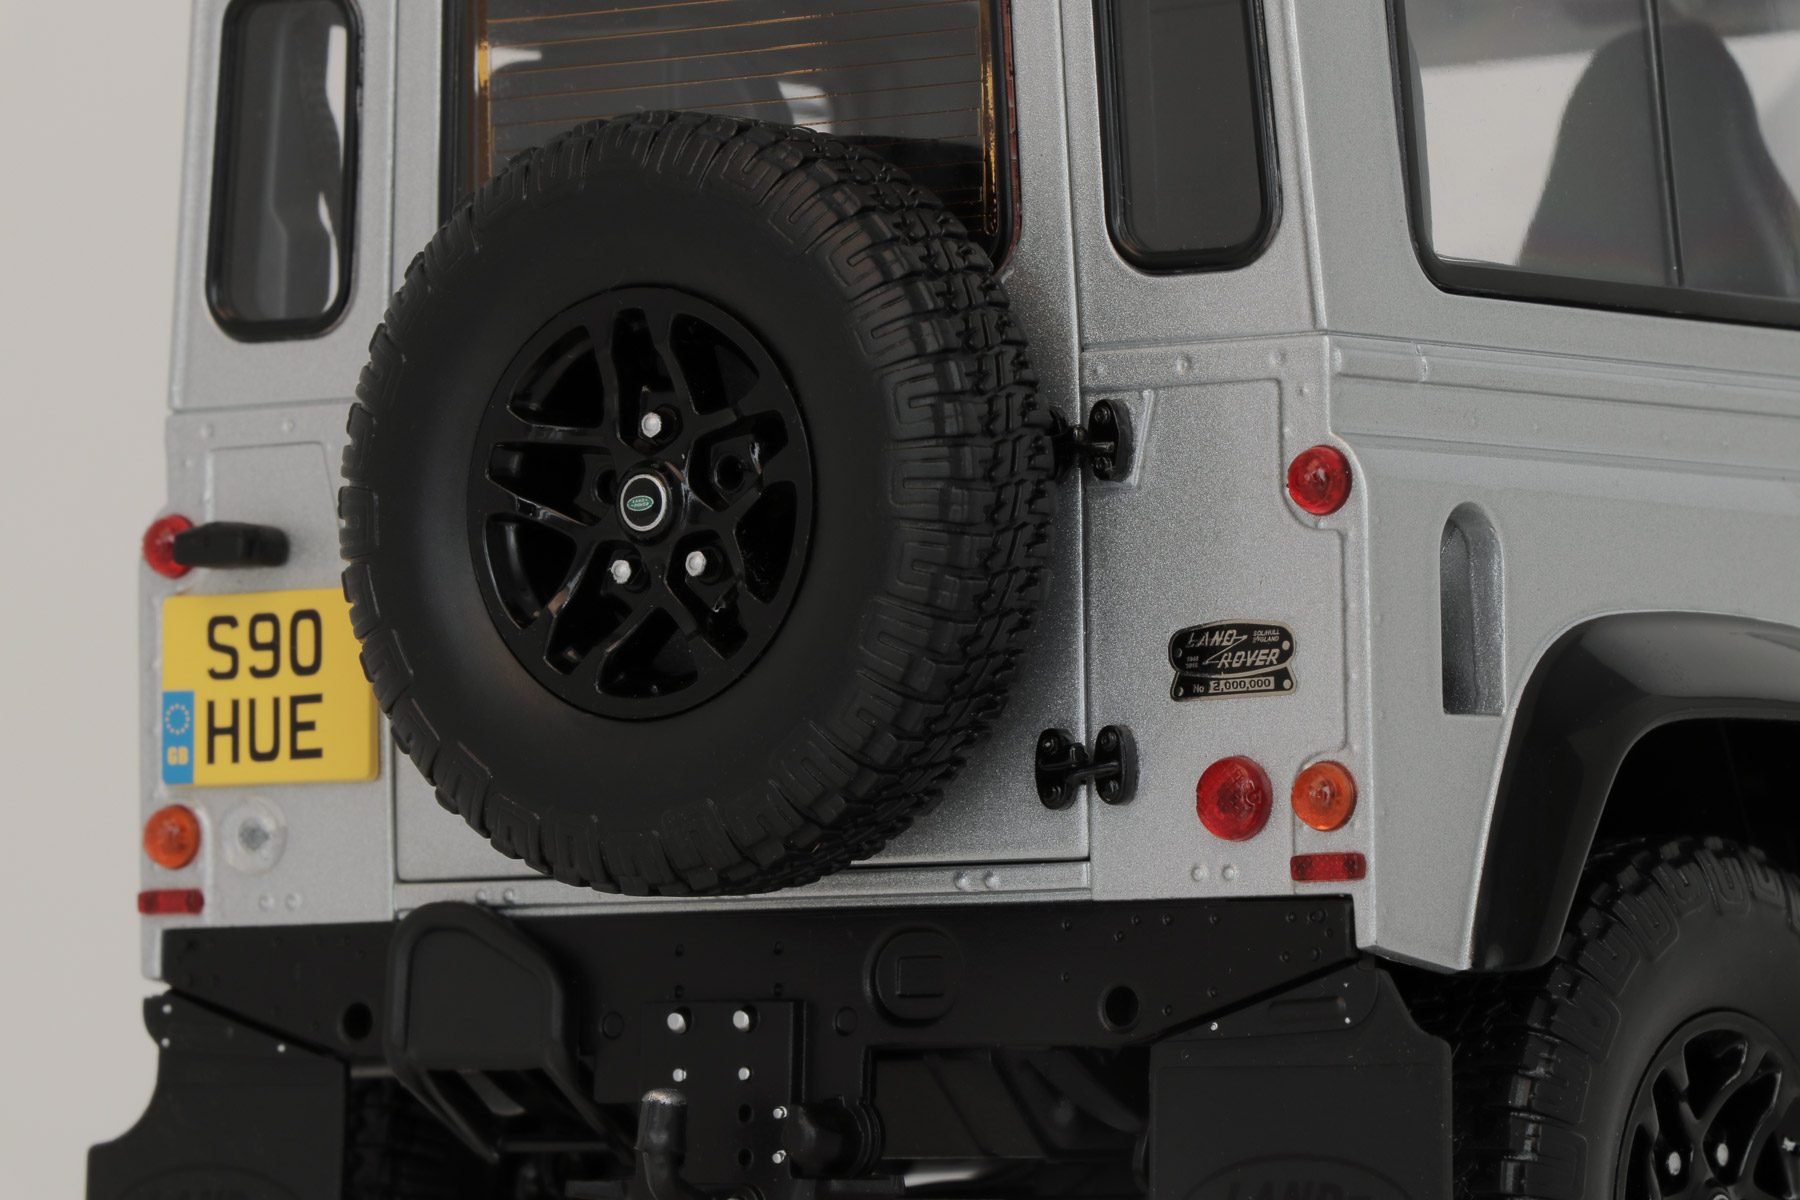 Almost Real Land Rover Defender 90 1:18